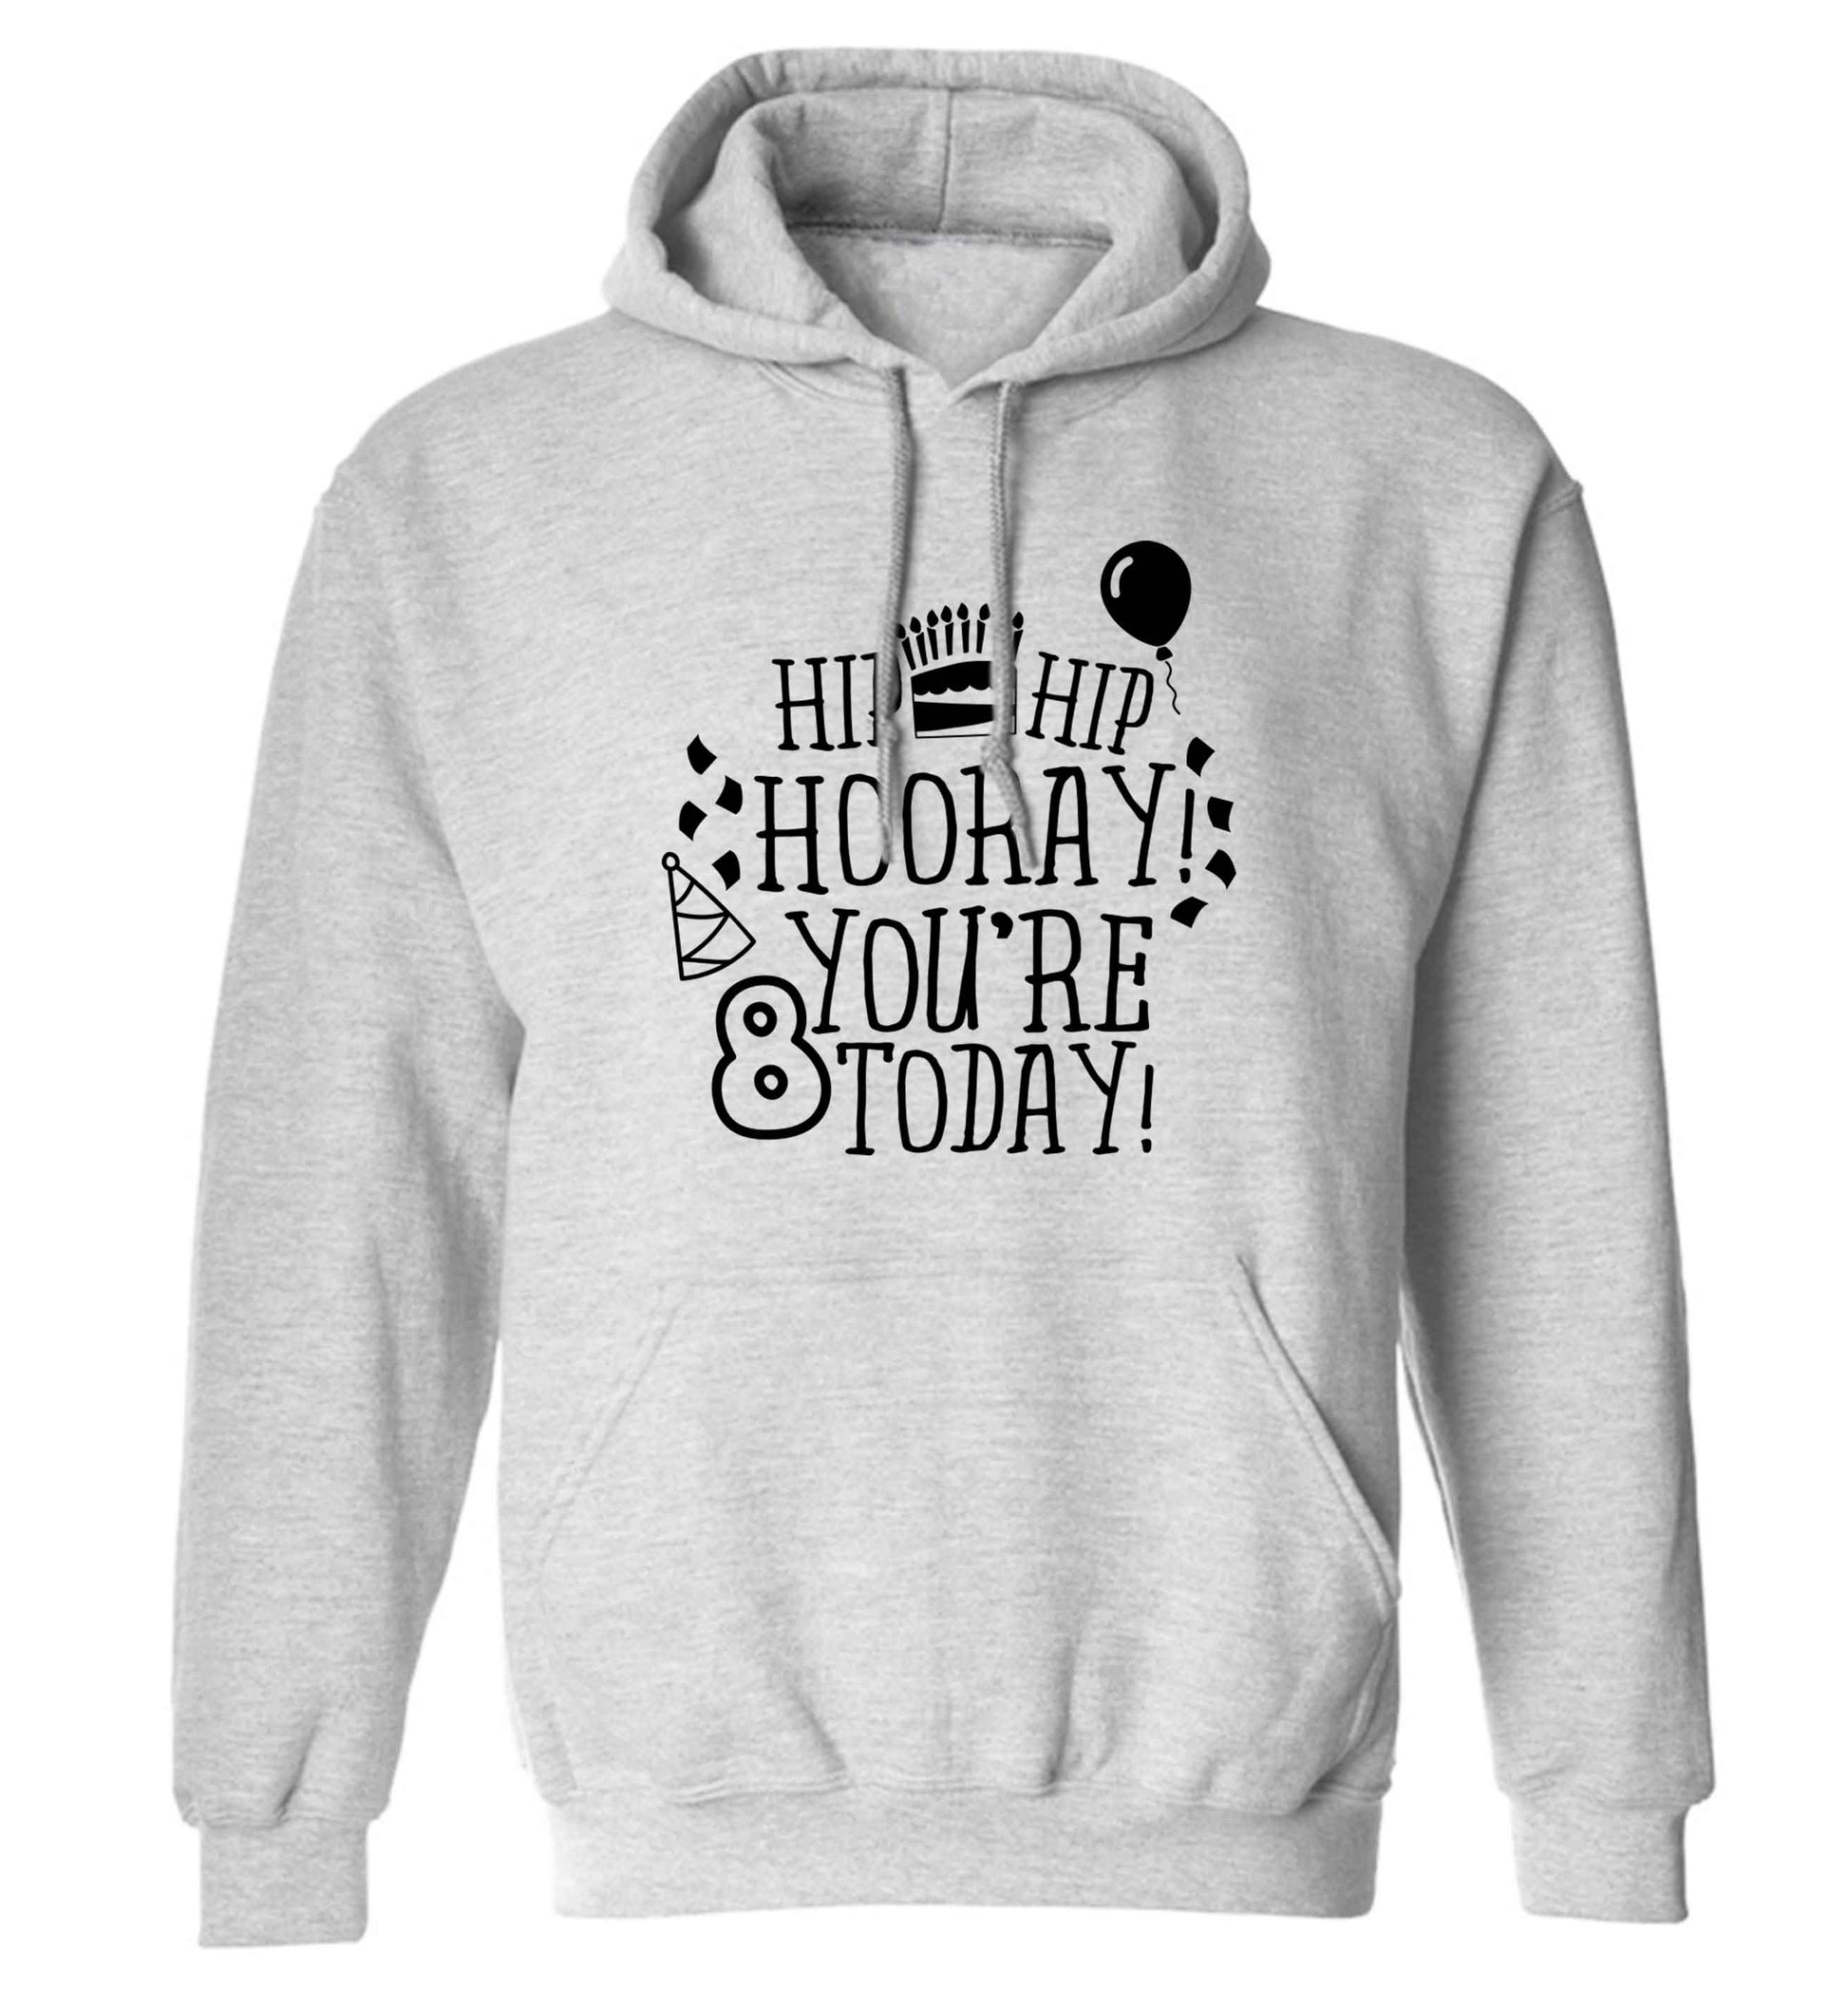 Hip hip hooray you're 8 today! adults unisex grey hoodie 2XL